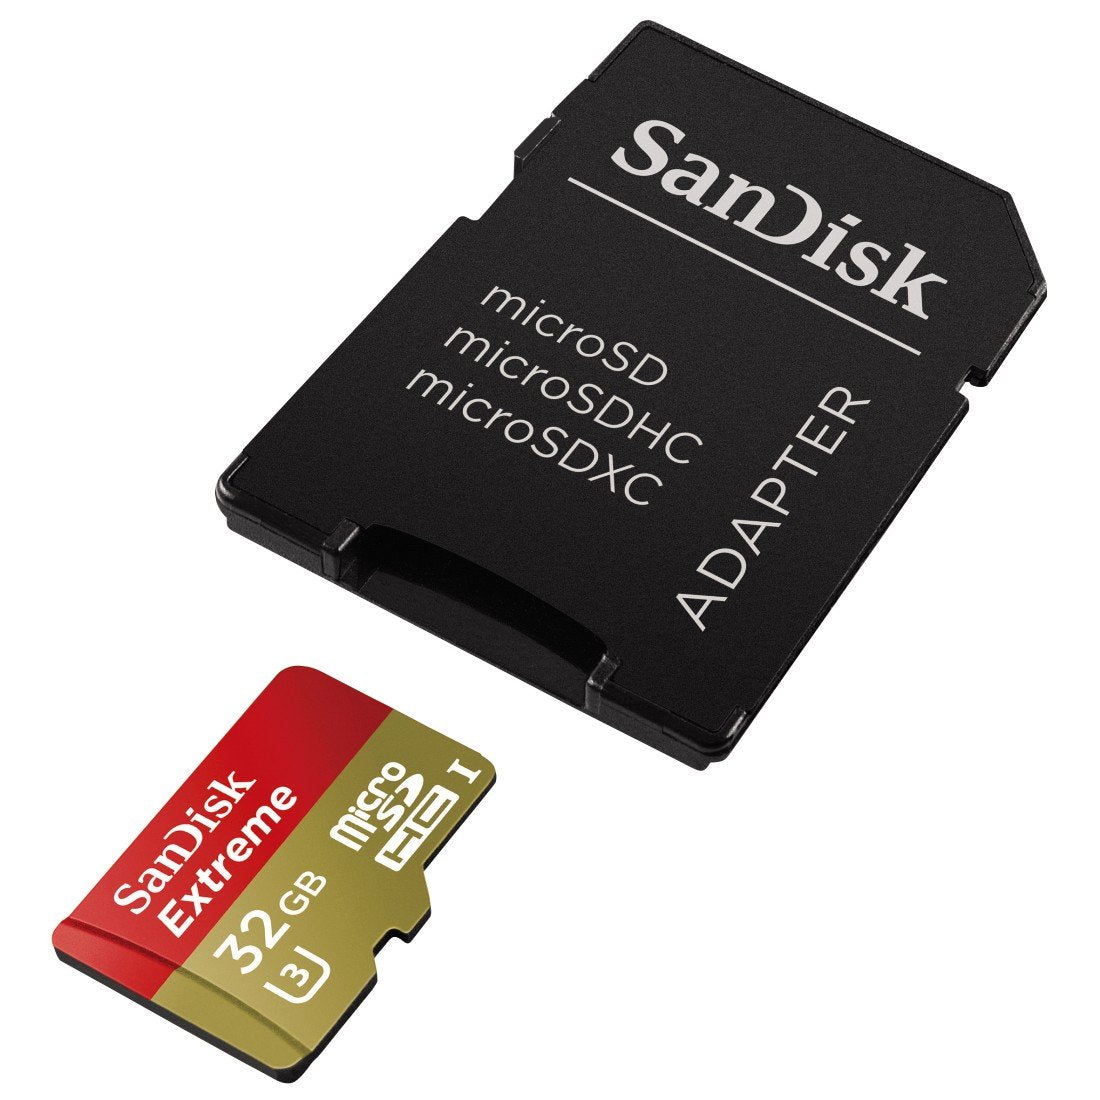 SanDisk Extreme 32GB UHS-I/U3 Micro SDHC Memory Card Up To 60MB/s Read With Adapter SDSDQXN-032G-G46A